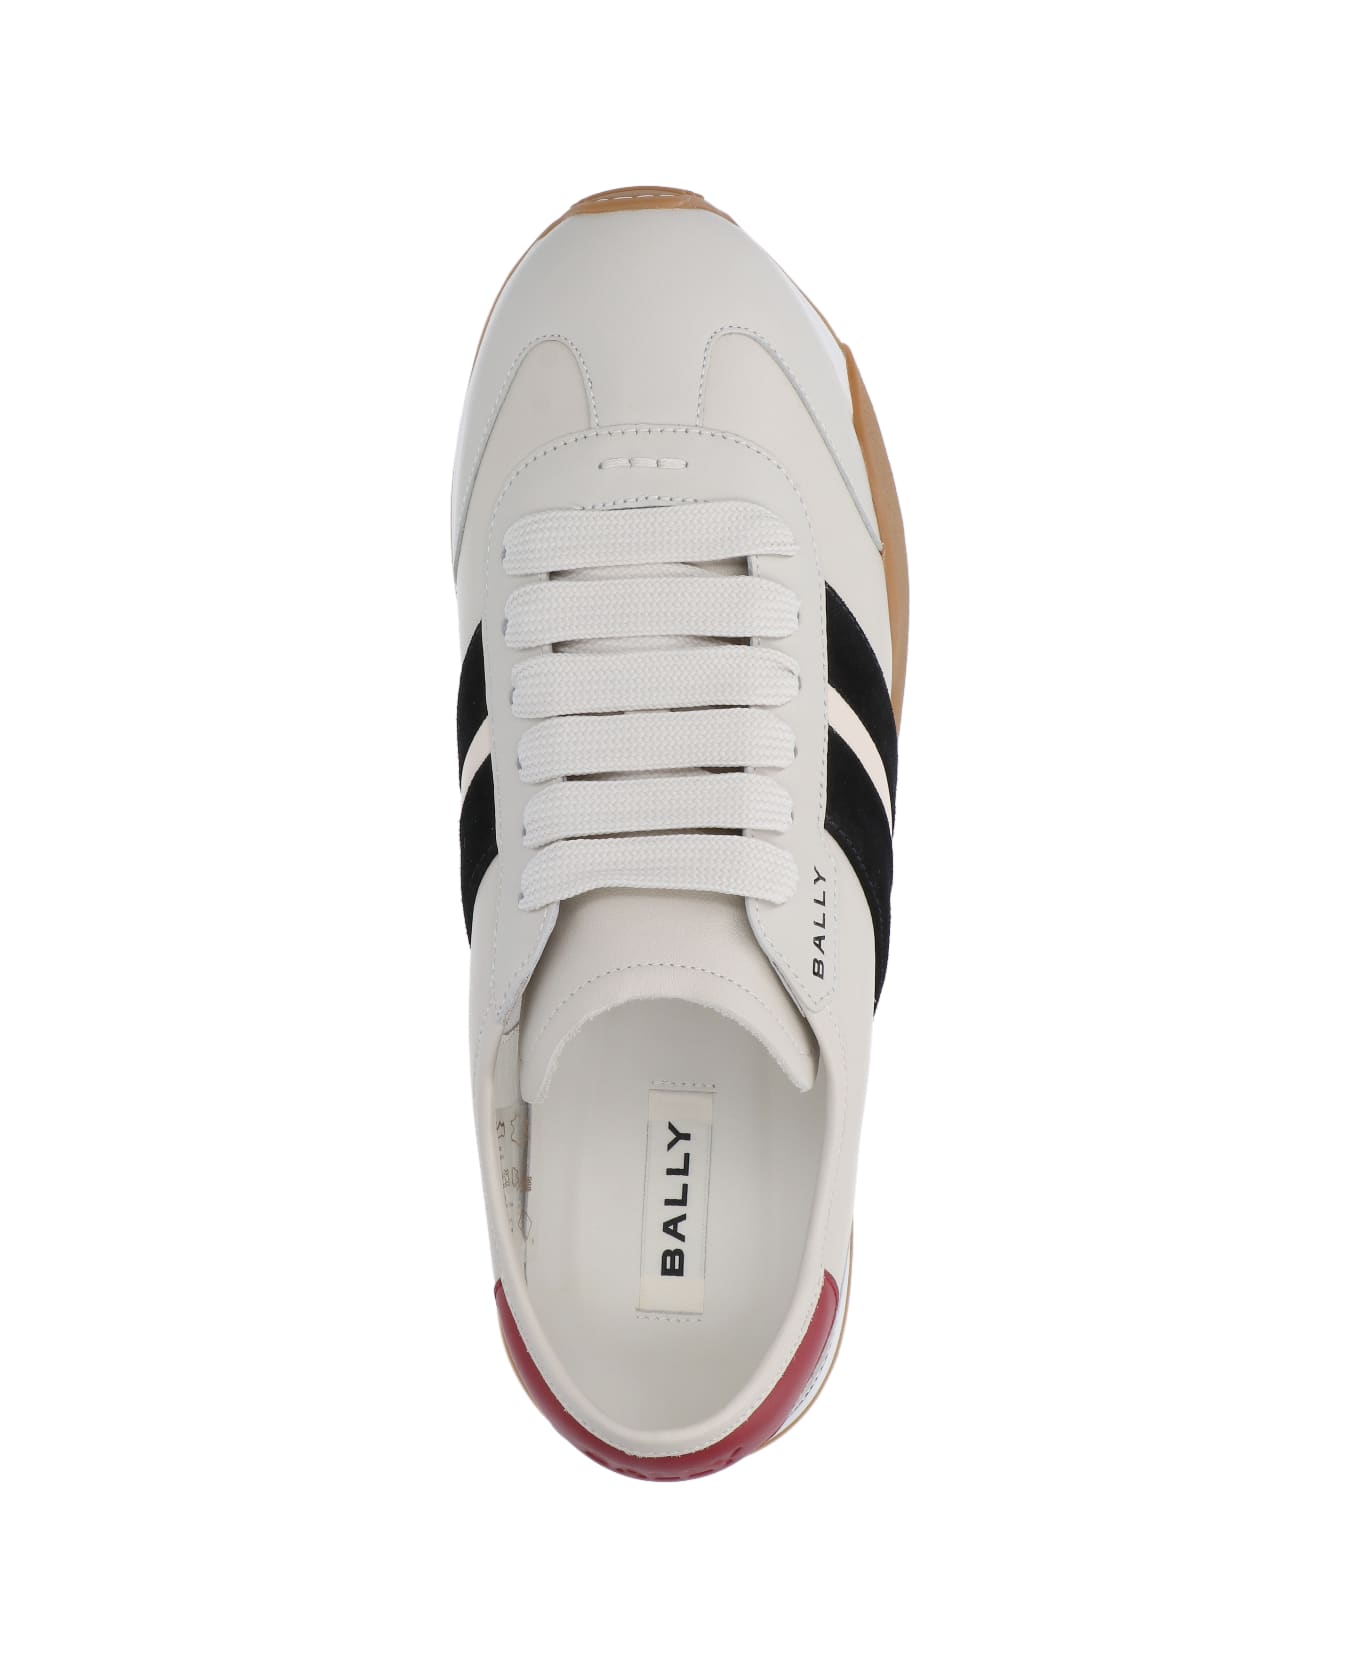 Bally "stewy" Sneakers - Crema